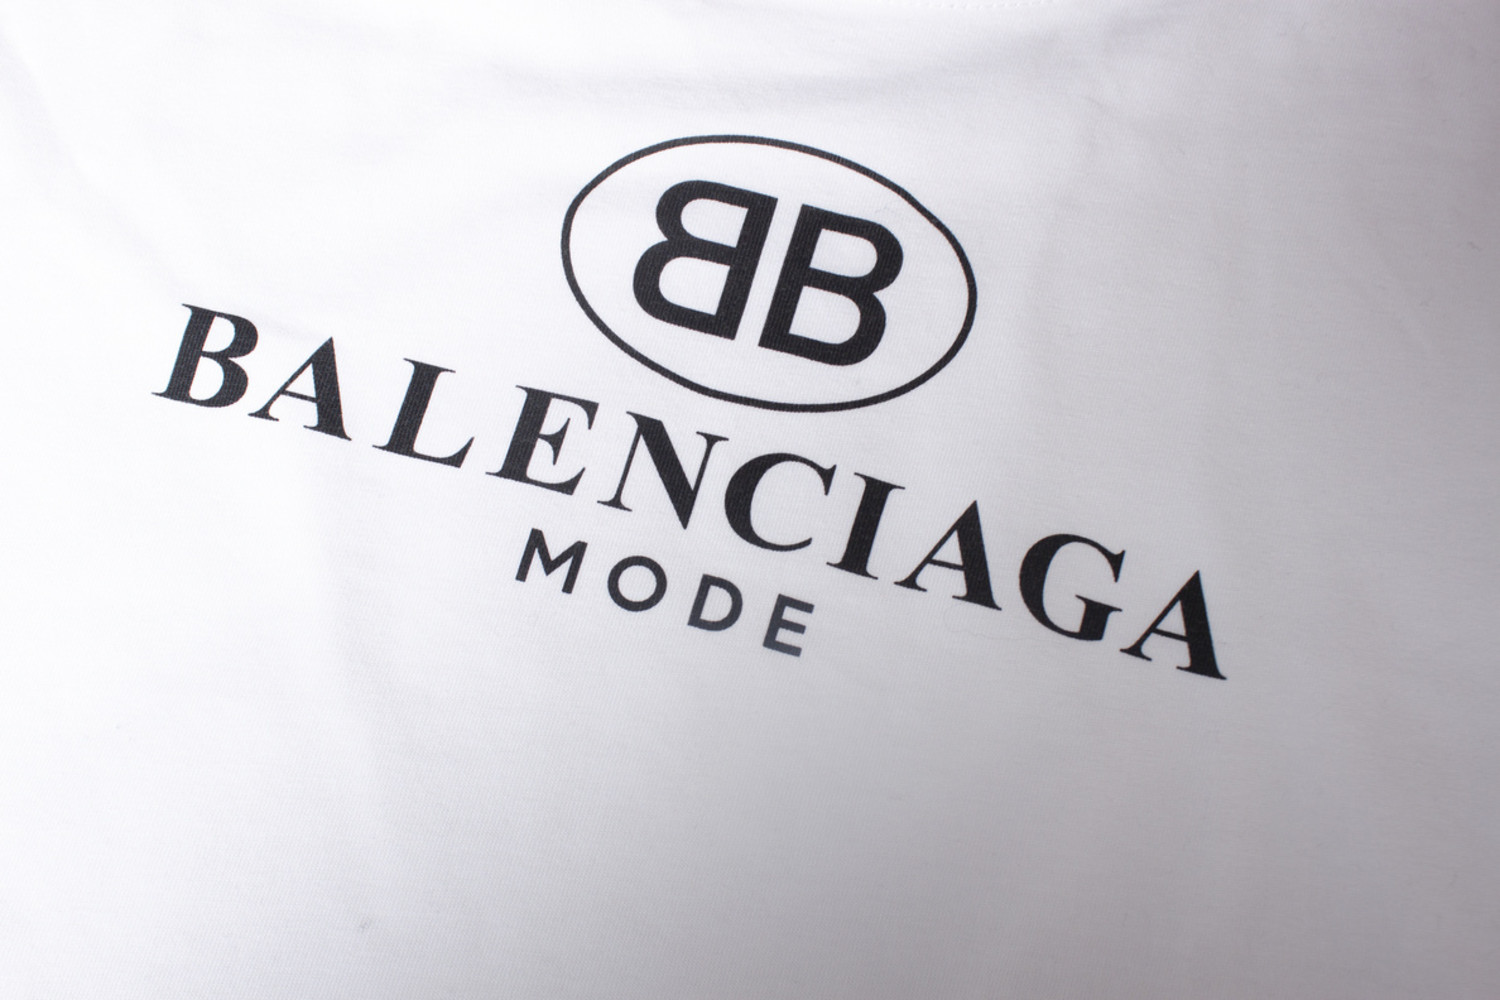 13 Balenciaga Icons  Free in SVG PNG ICO  IconScout